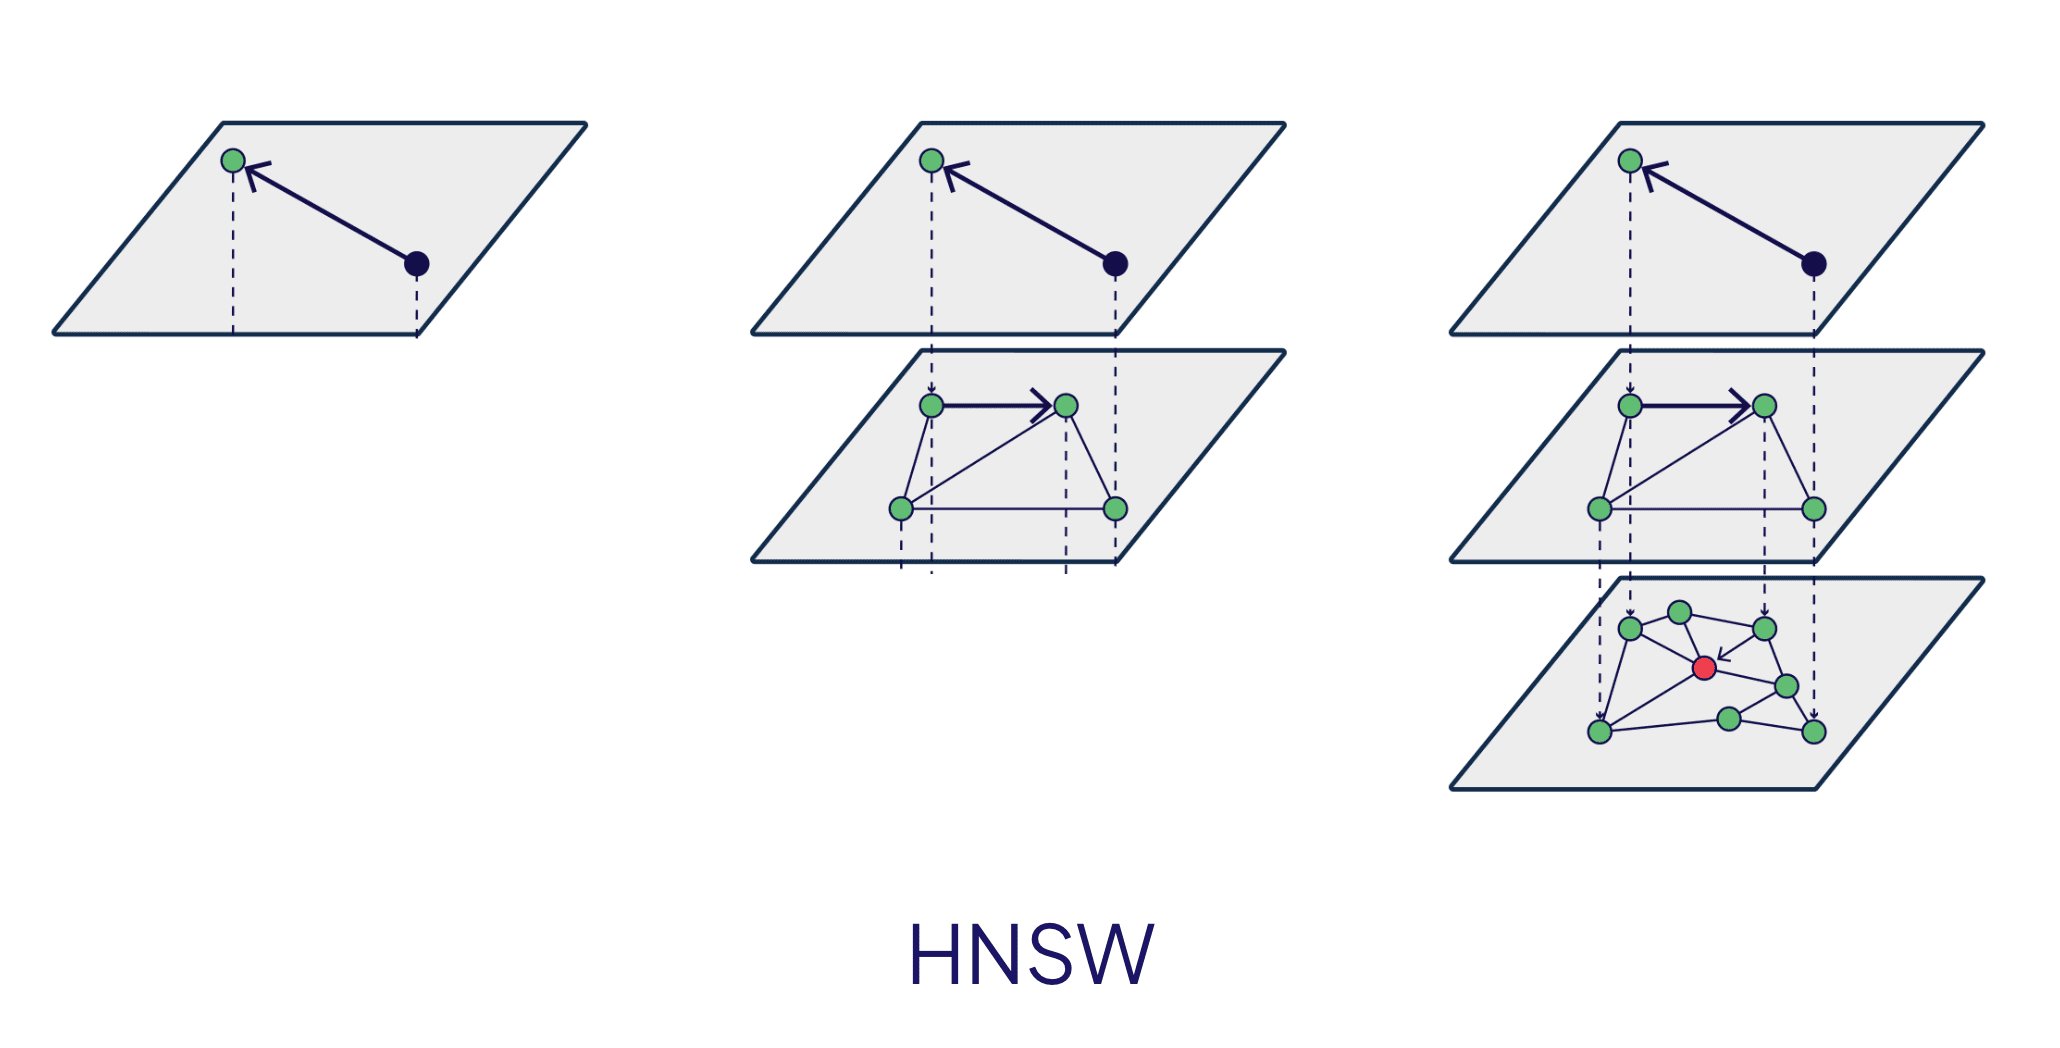 Outline of HNSW graph, showing nodes connected in multiple layers